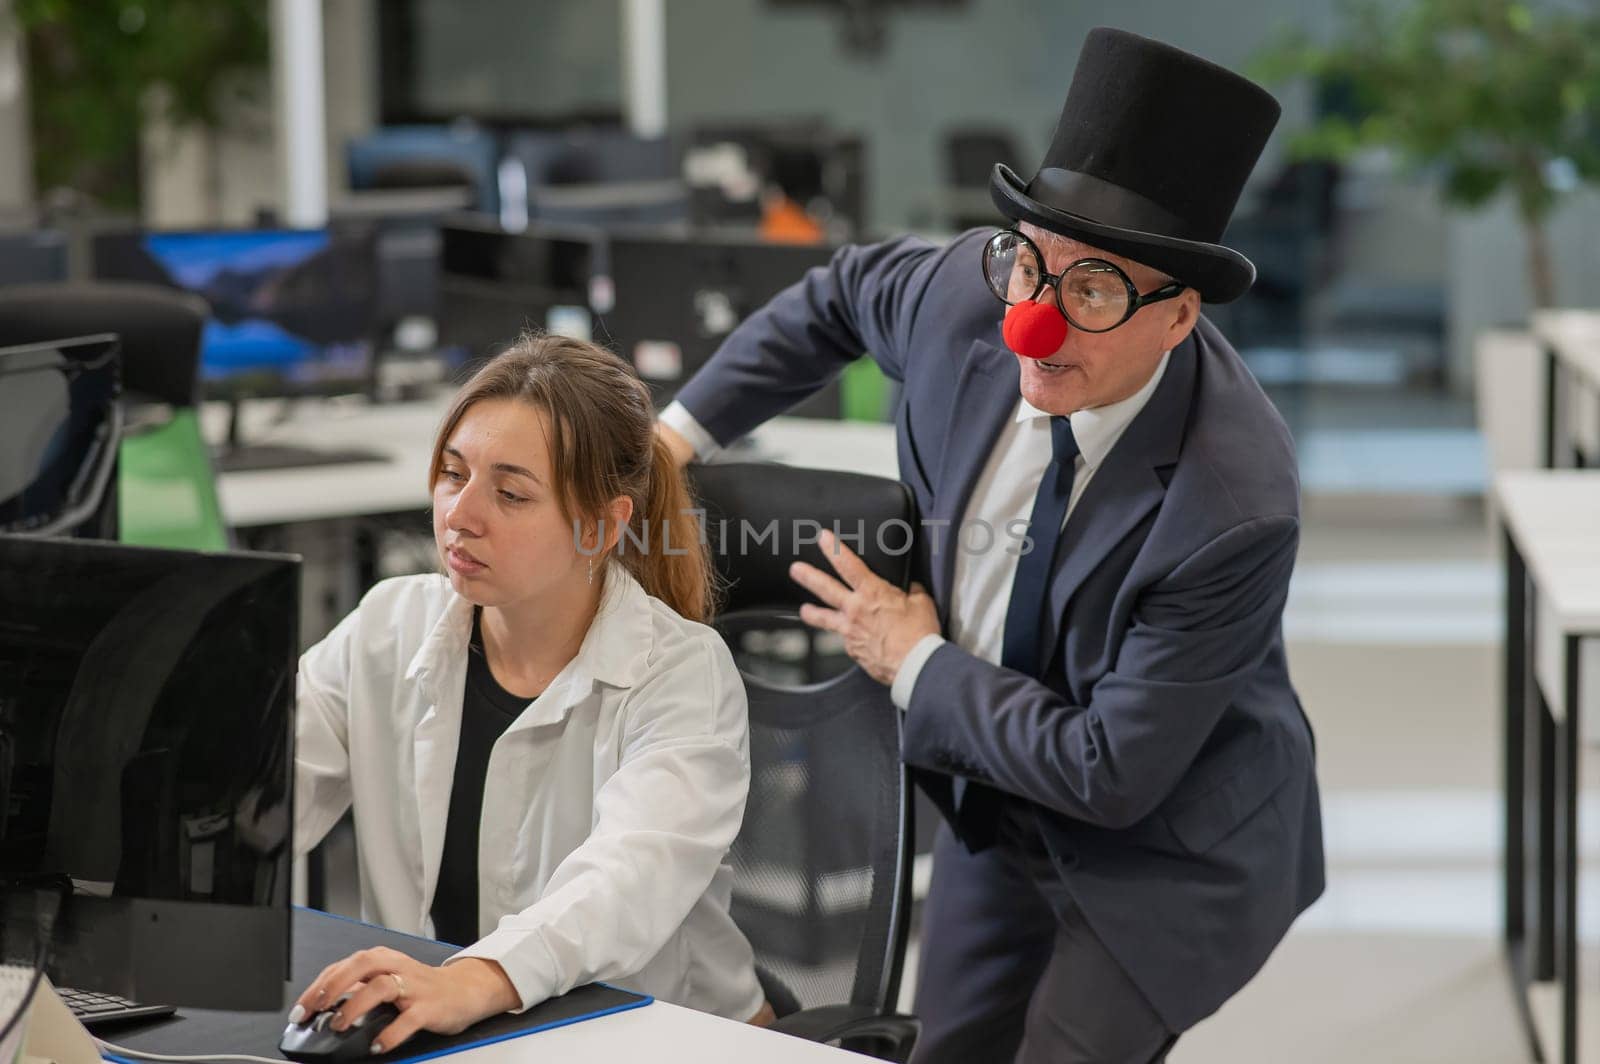 Caucasian woman works at the computer. Elderly man in clown costume in office. by mrwed54